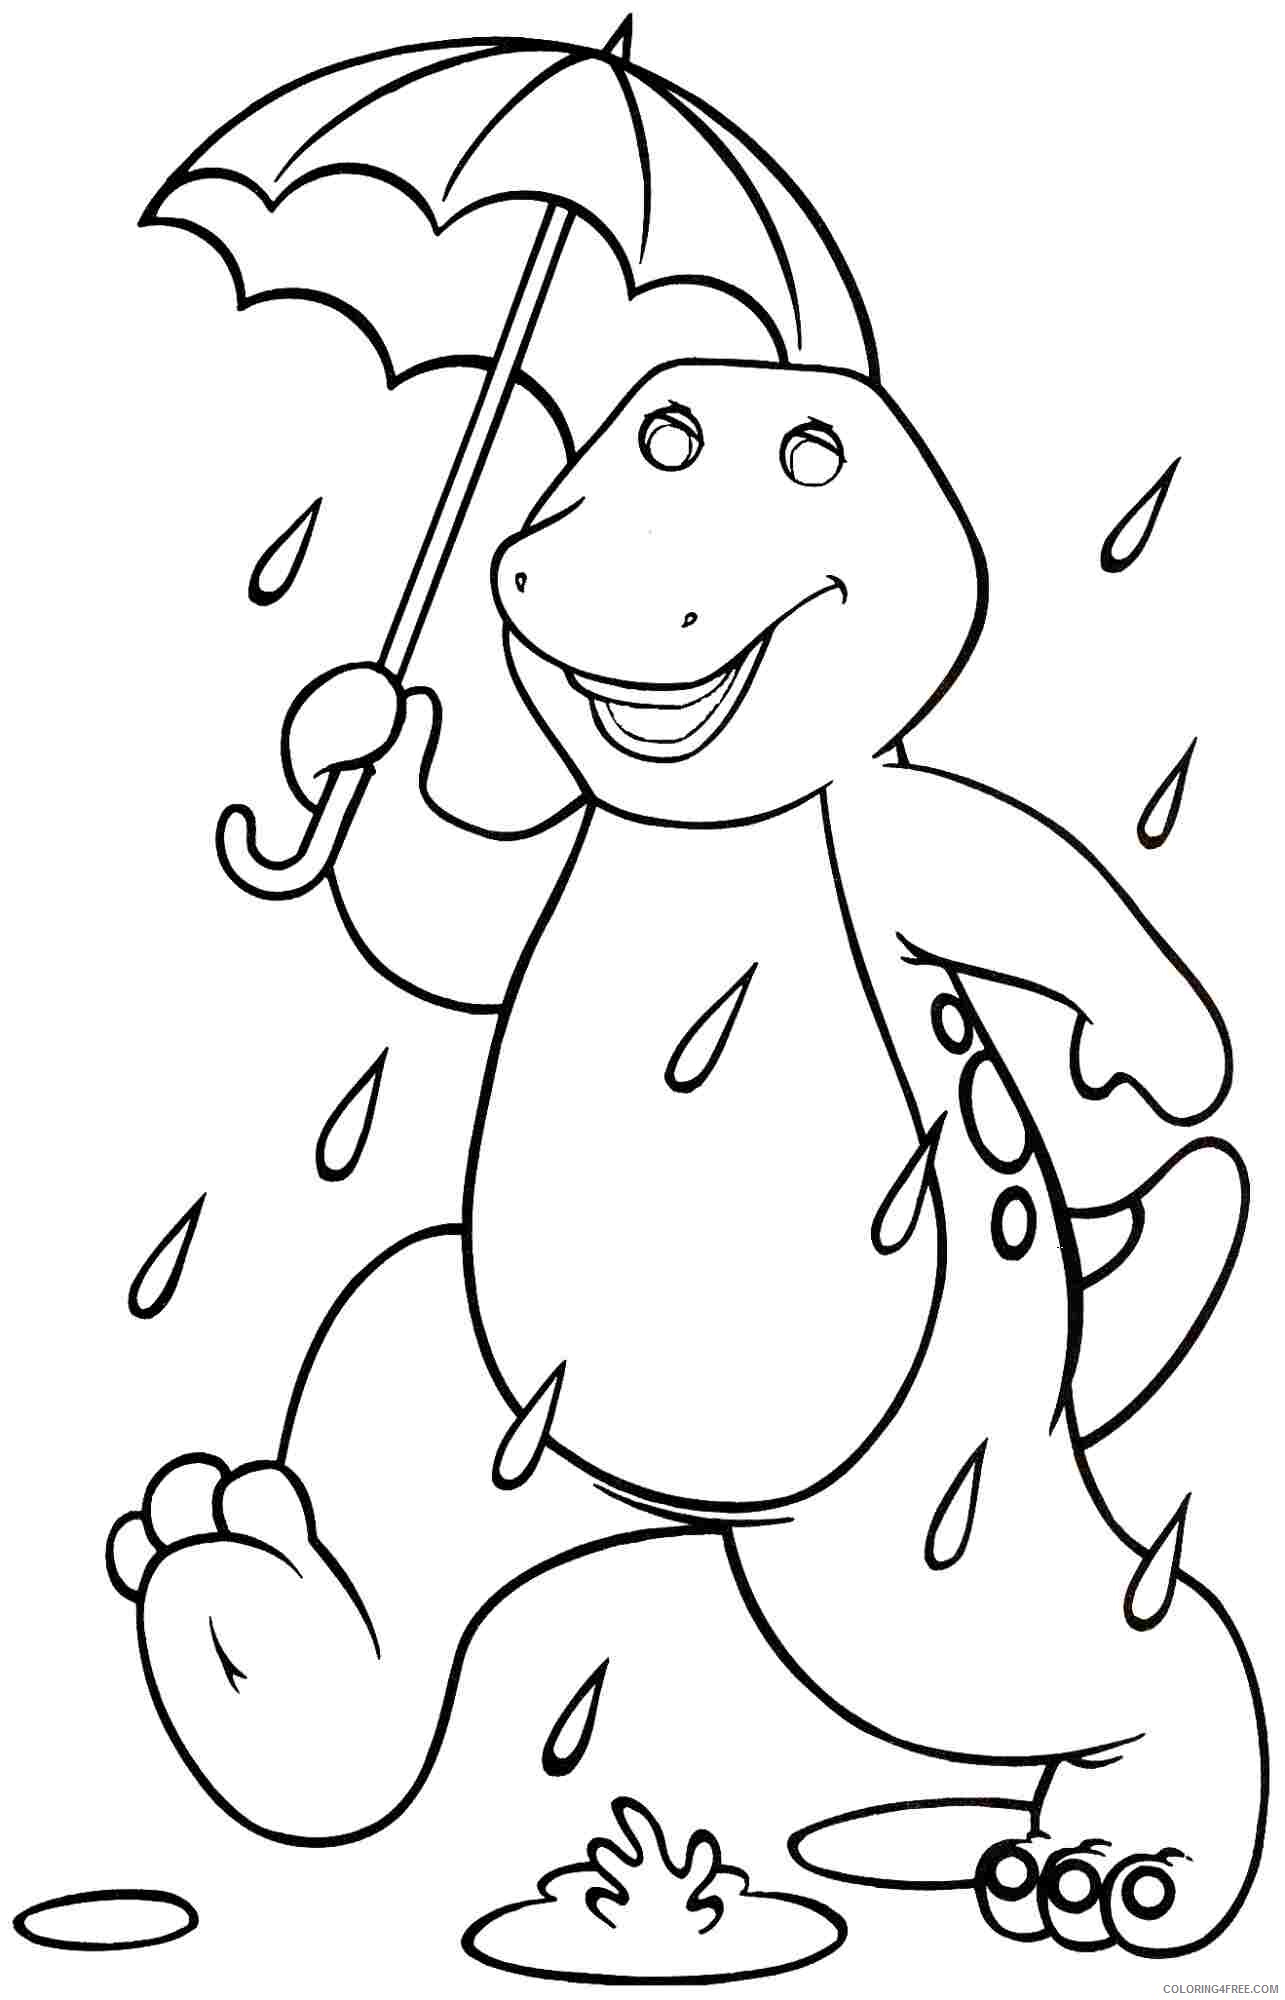 Barney and Friends Coloring Pages TV Film Free Barney Printable 2020 00691 Coloring4free